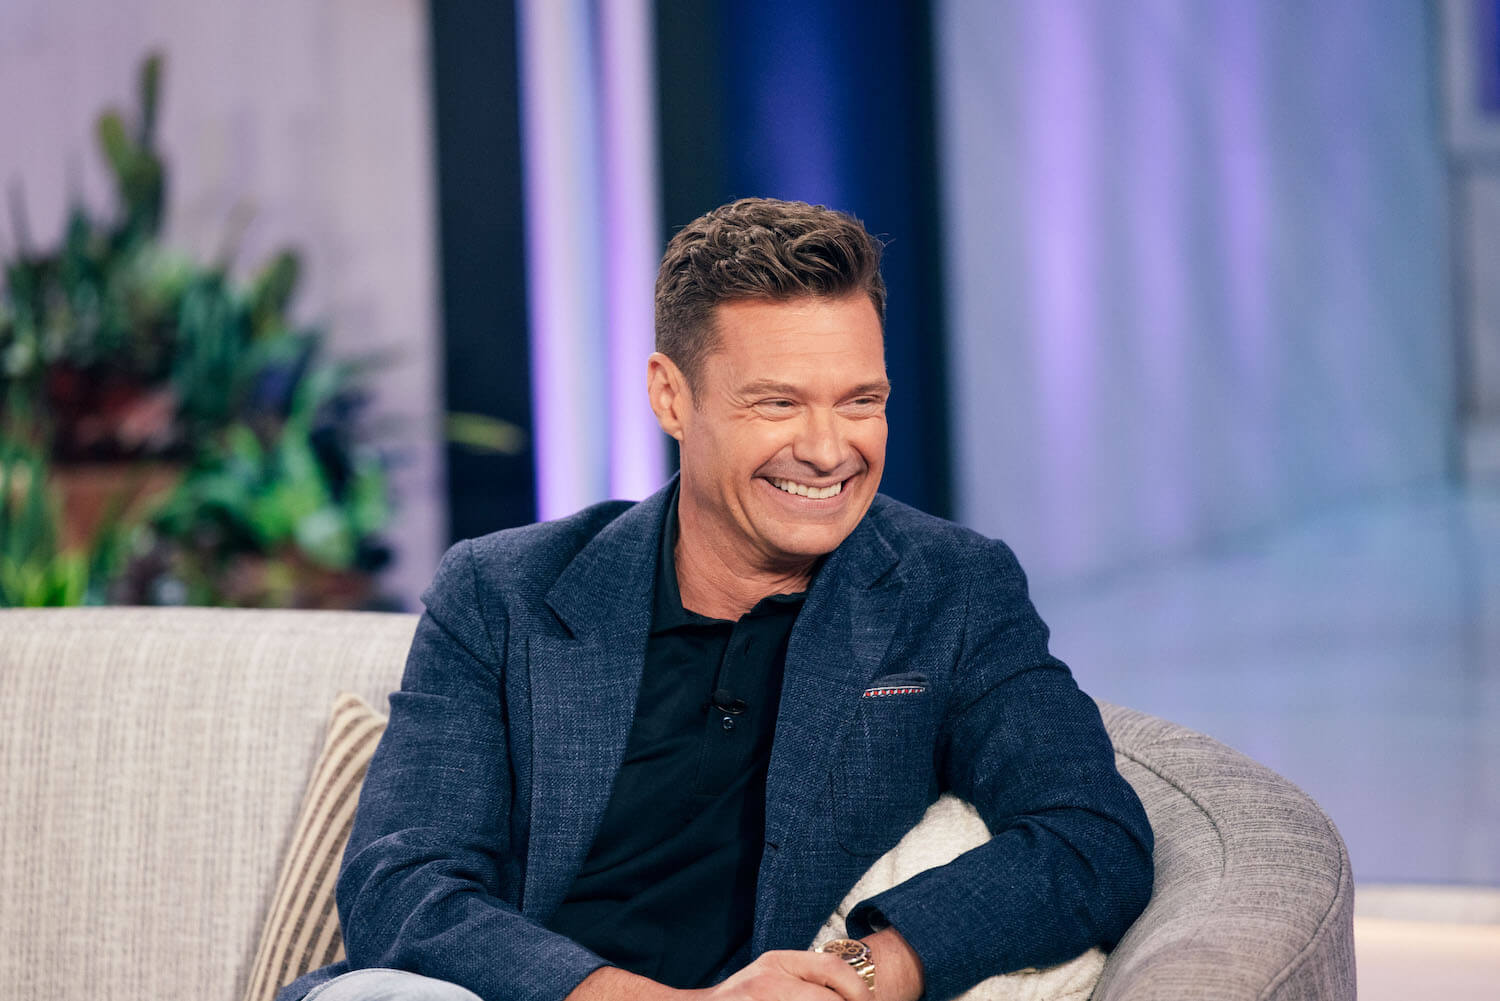 'American Idol' host Ryan Seacrest smiling on a couch. Seacrest is the future host of 'Wheel of Fortune.'